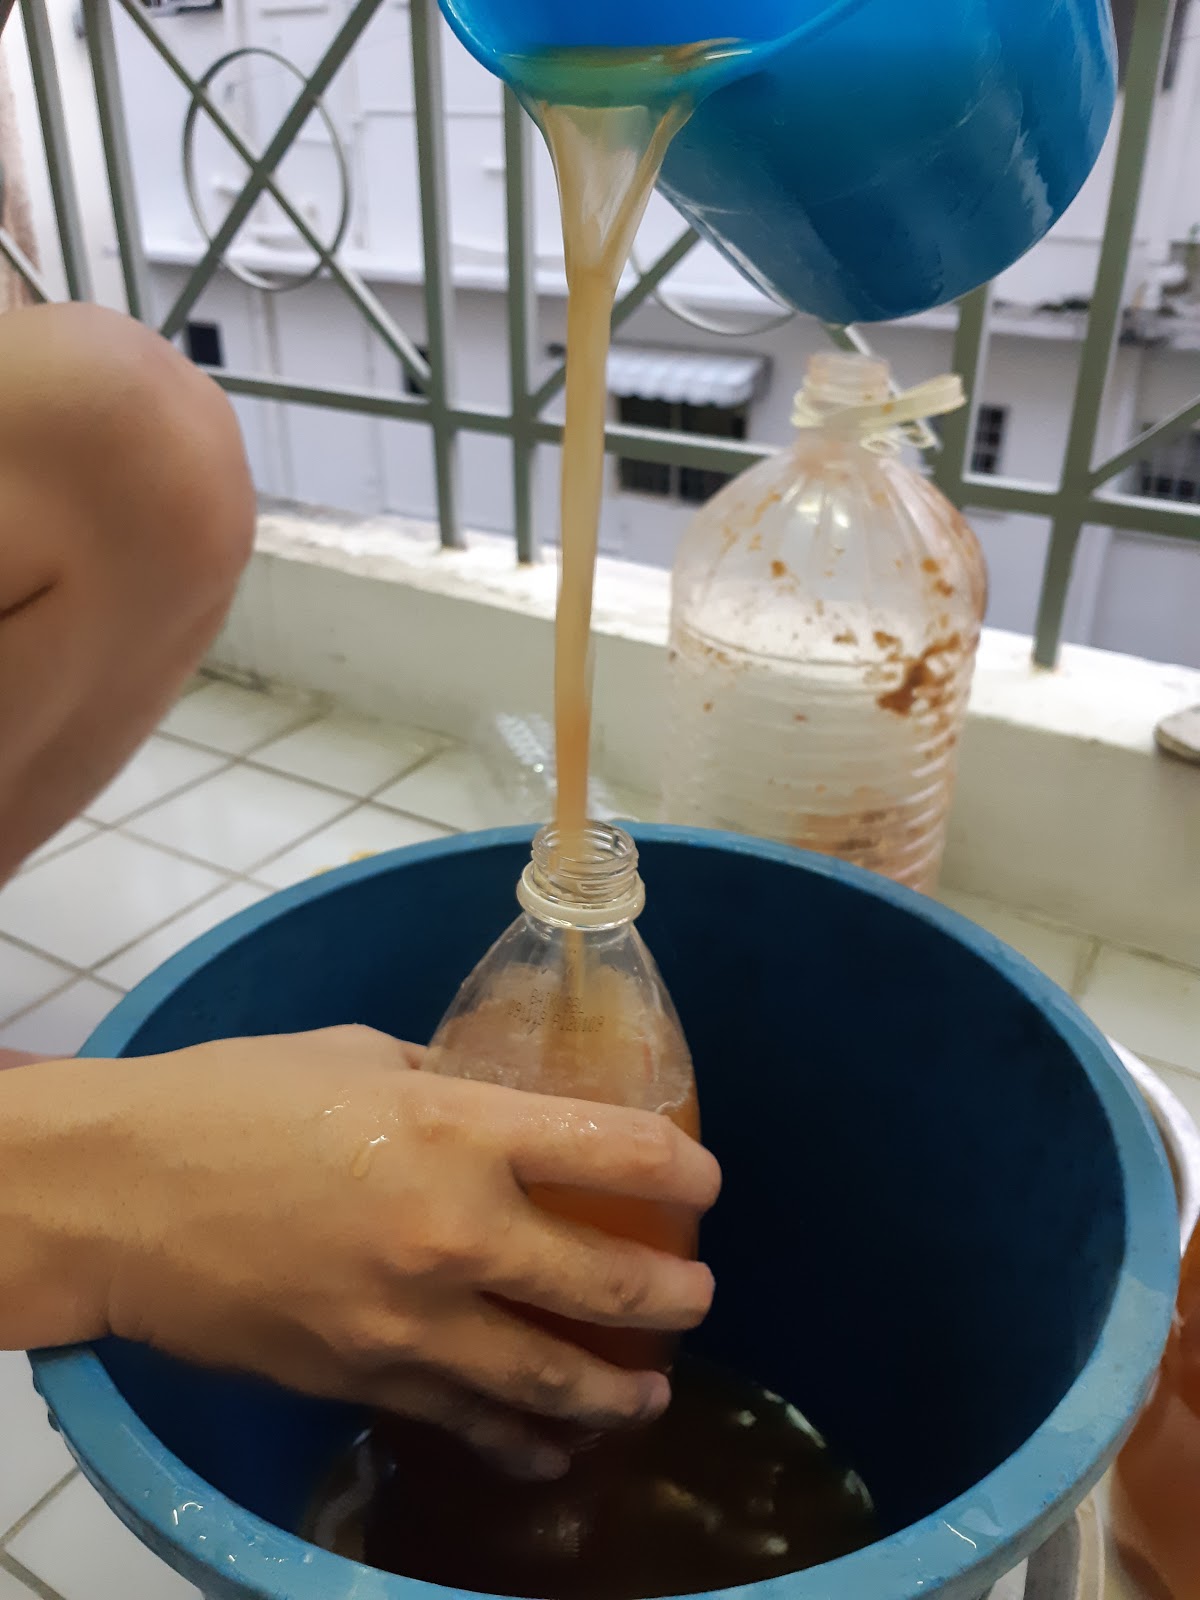  DIY  Garbage Enzyme Learn a new skill during  the MCO  